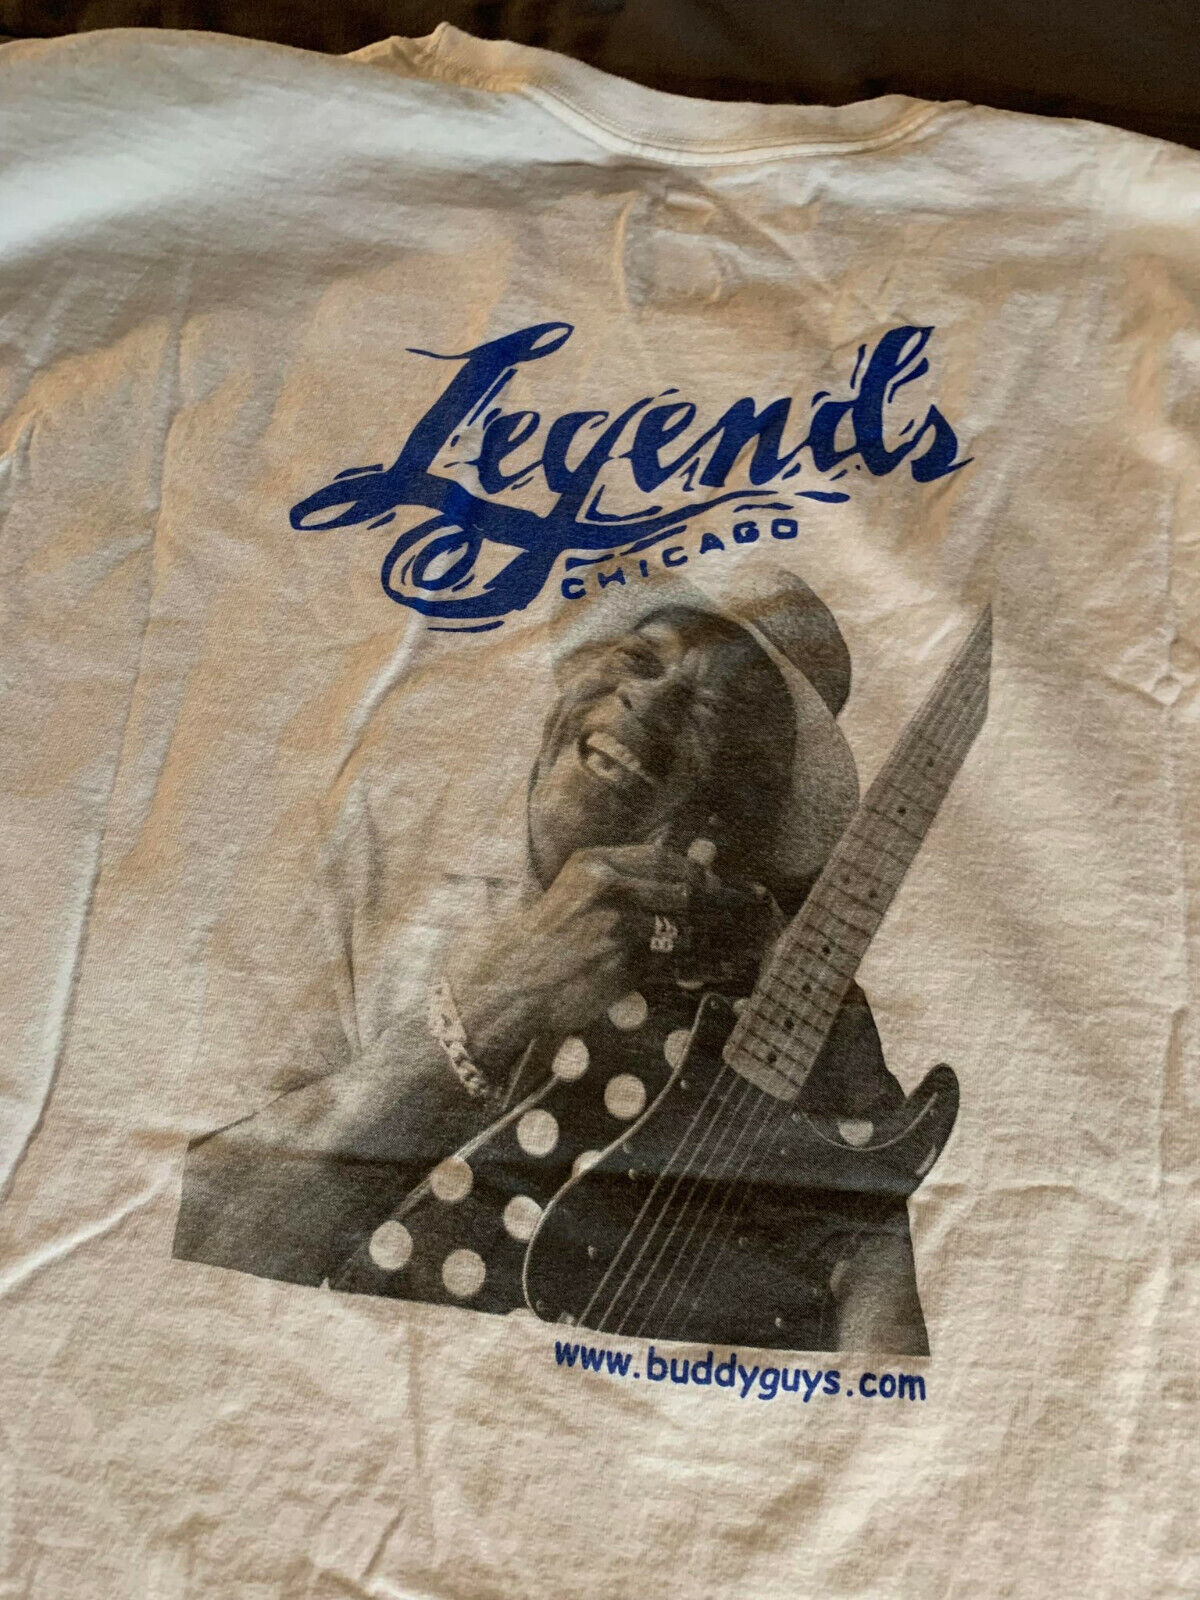 Buddy Guy Men's Size Xl White Legends Chicago T-shirt Tee Nice! Fast Ship!